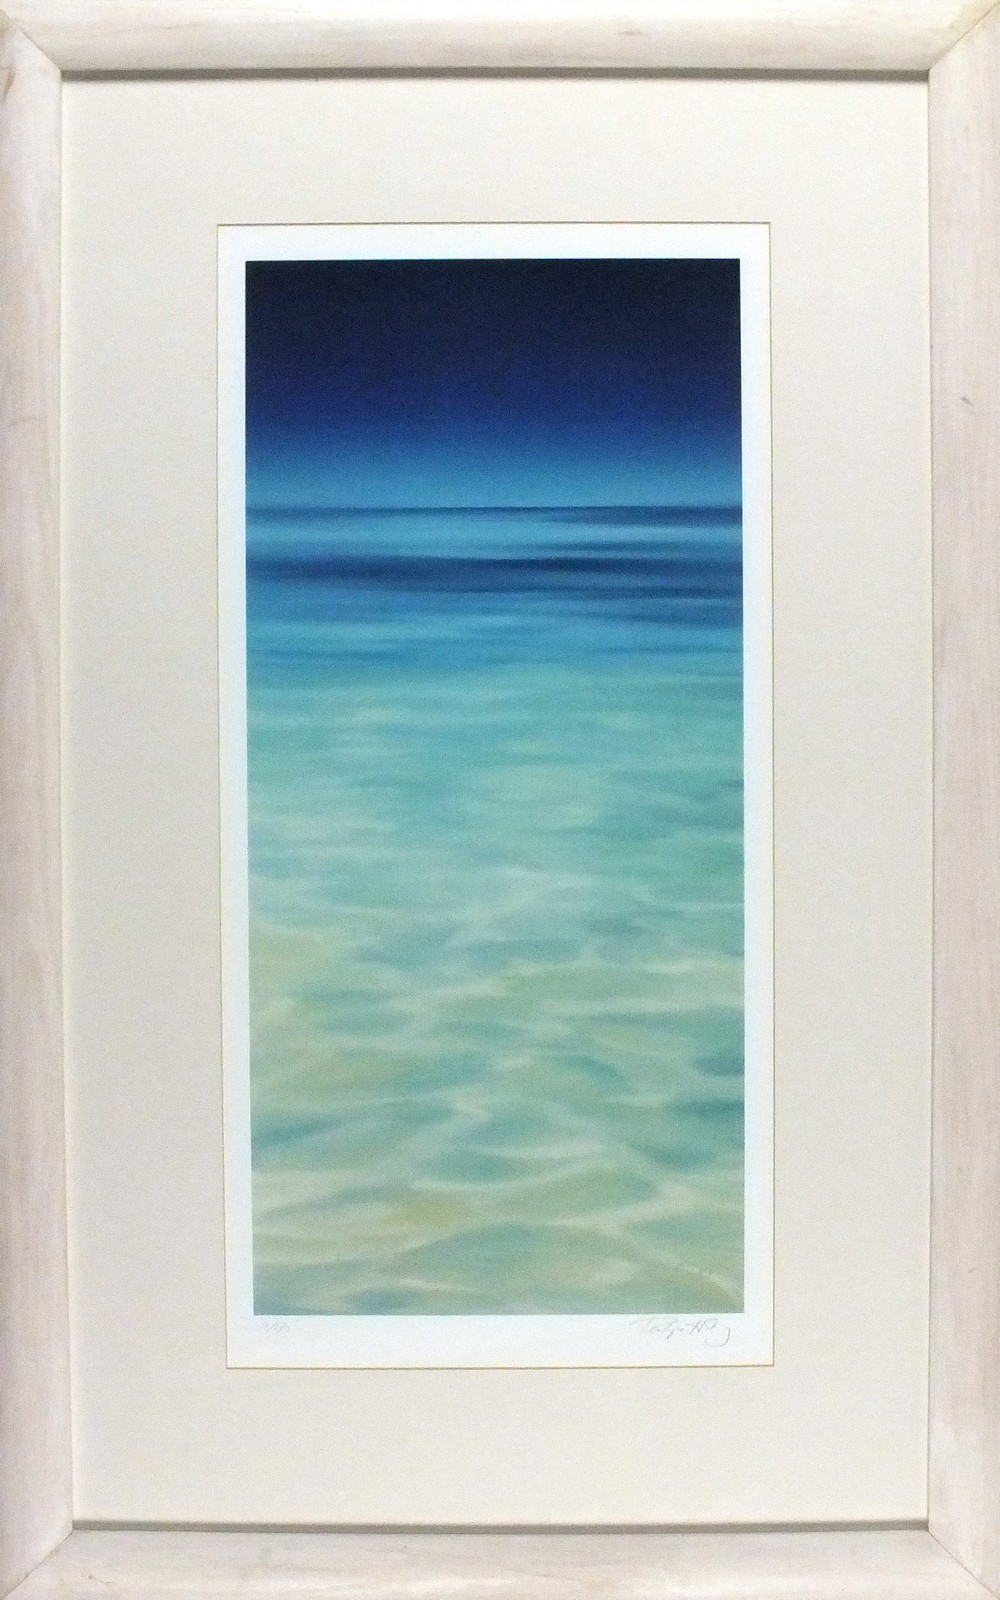 Penelope H STAREY (British 20th Century) Seascape, Lithograph, Signed and numbered 4/175 in pencil - Image 5 of 6